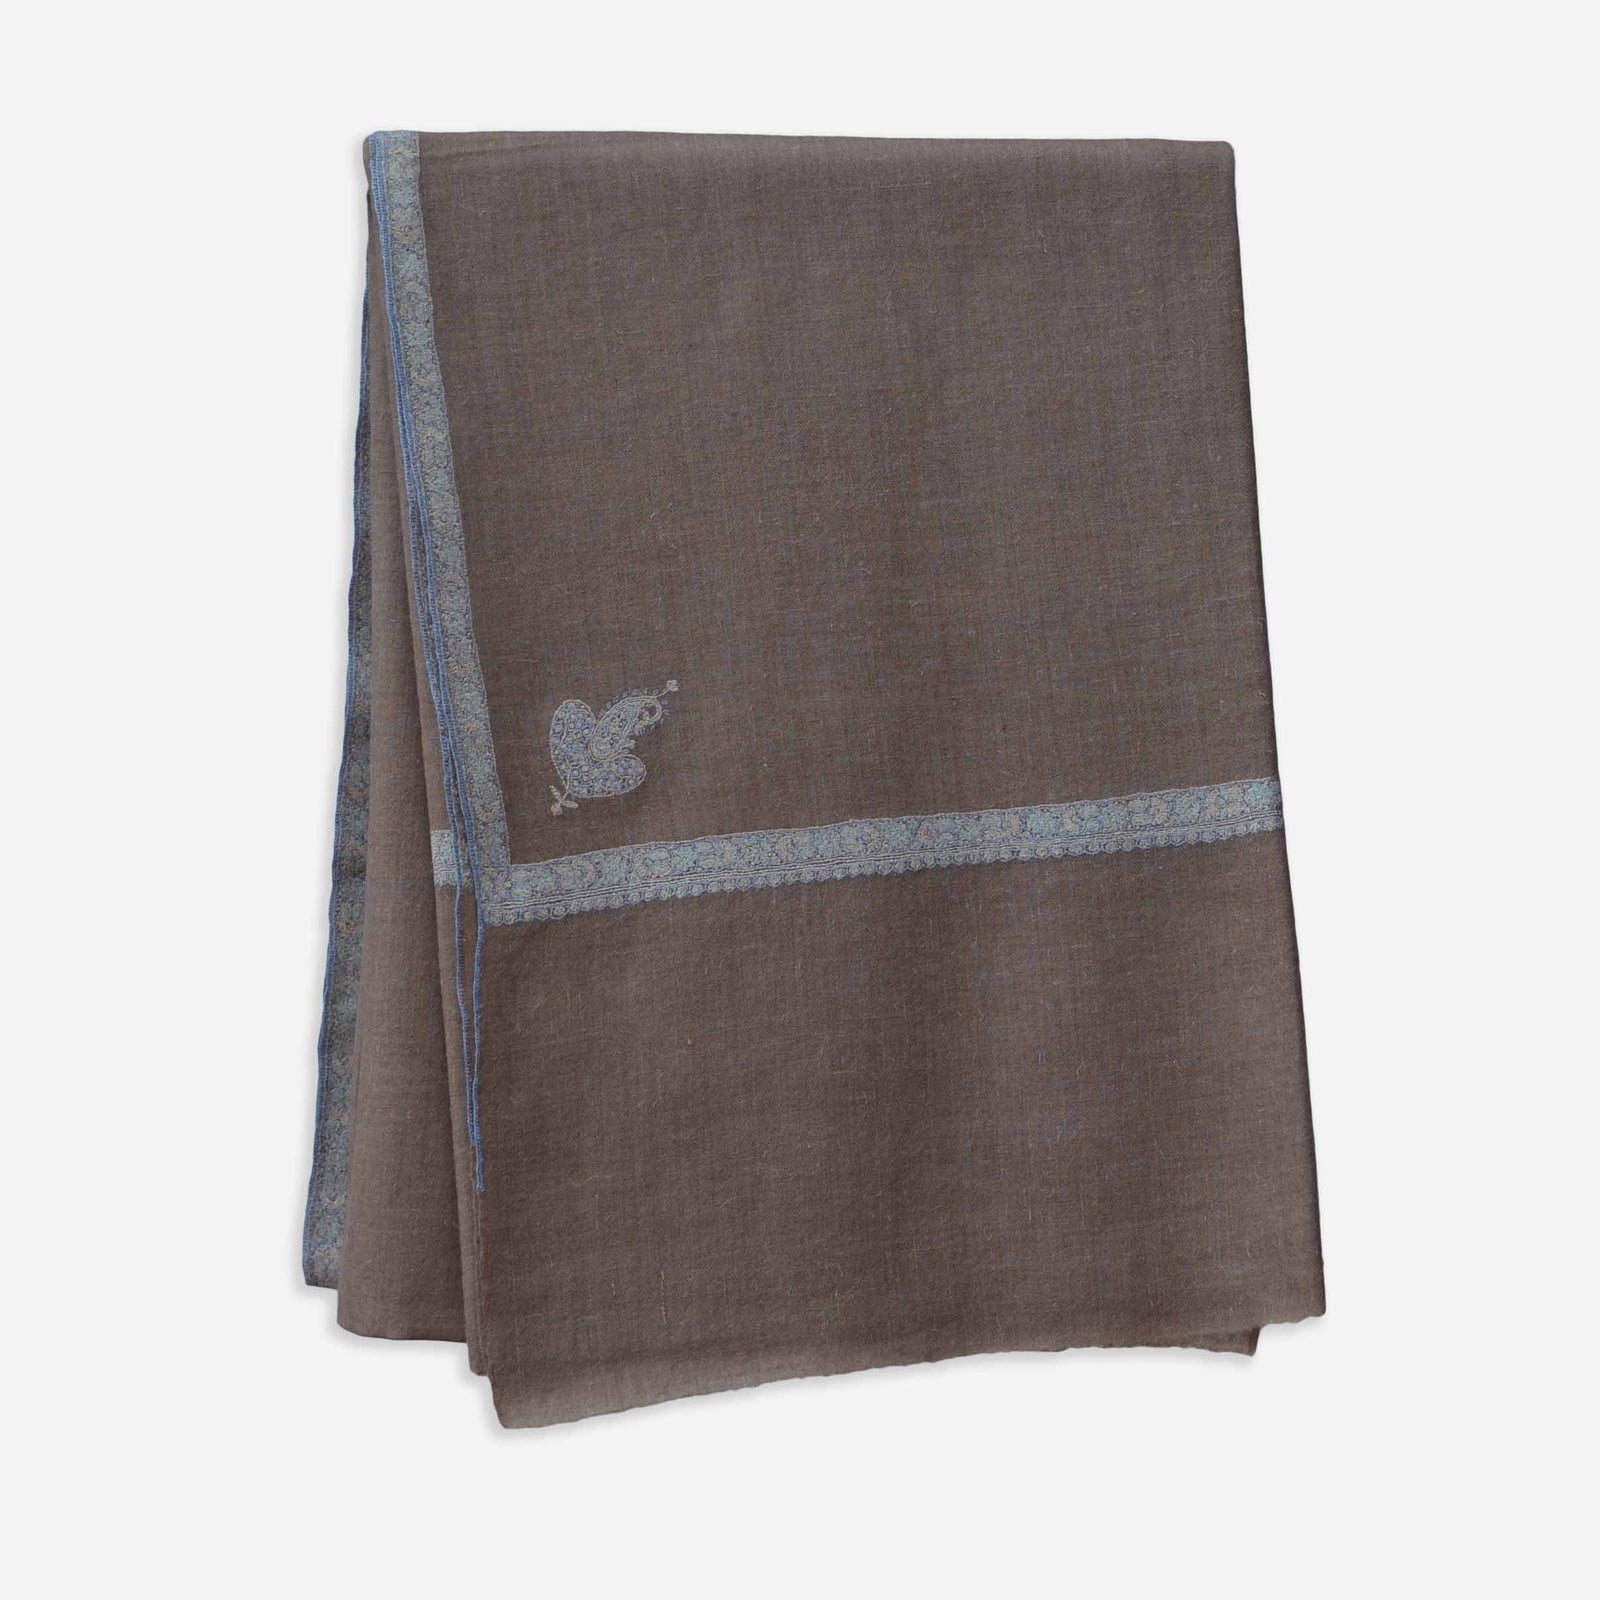 Un Dyed taupe cashmere pashmina border embroidery shawl